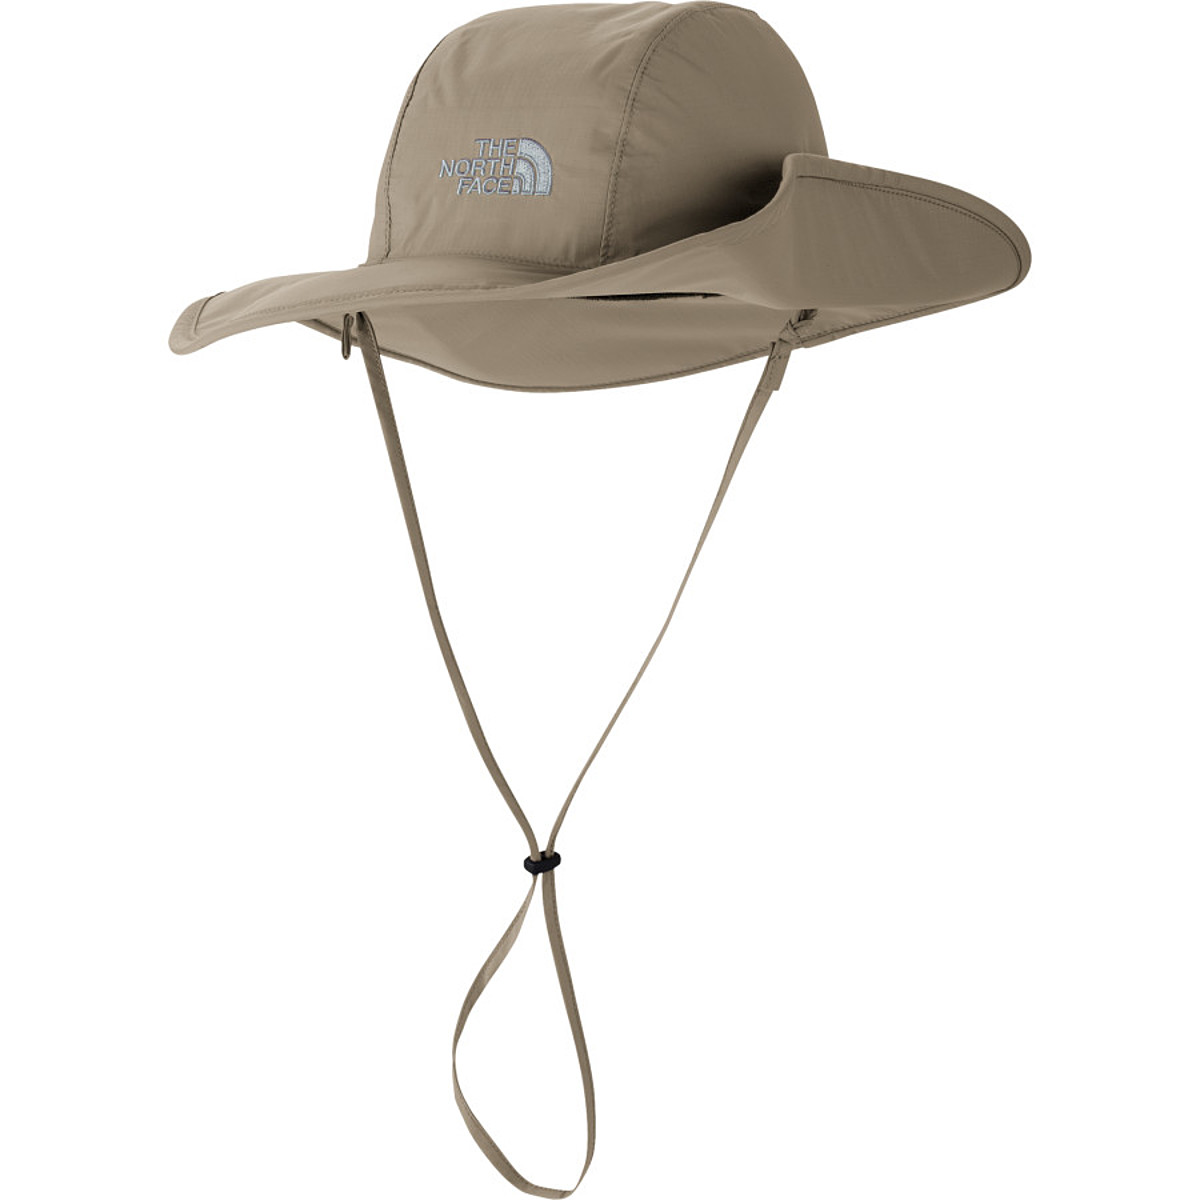 north face gtx hiker hat review